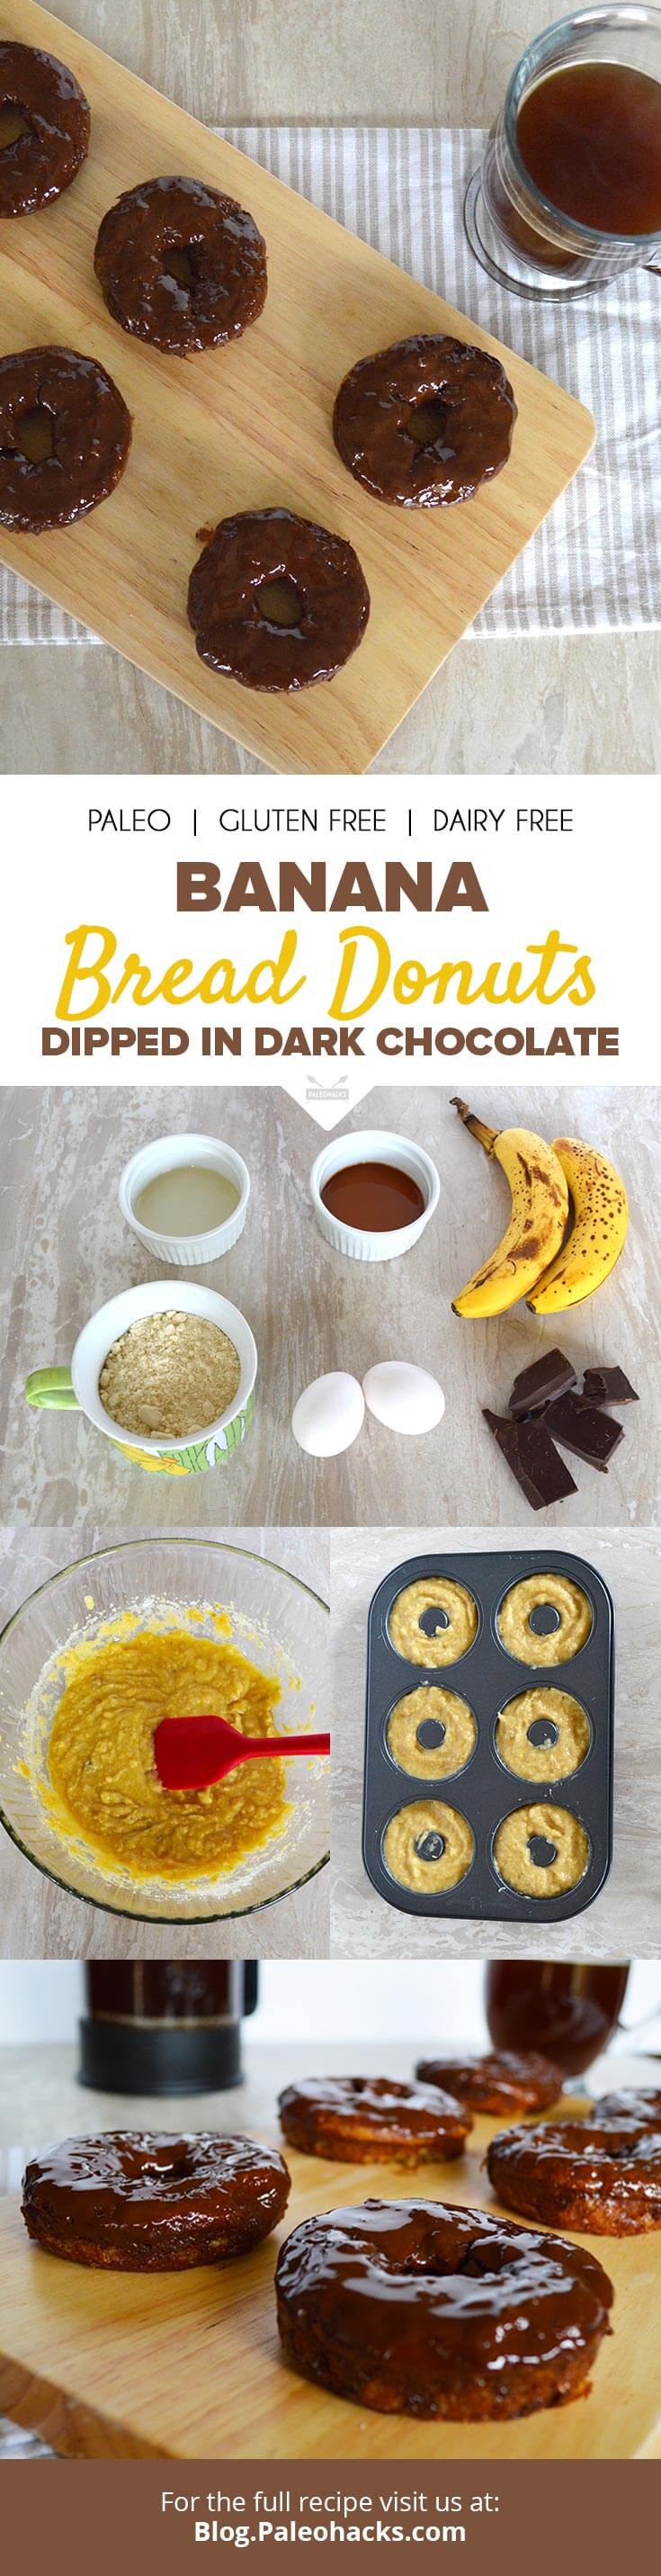 Craving a decadent, clean-eating breakfast? These chocolate-glazed banana bread donuts are the moistest, cakiest treats we’ve ever tried.